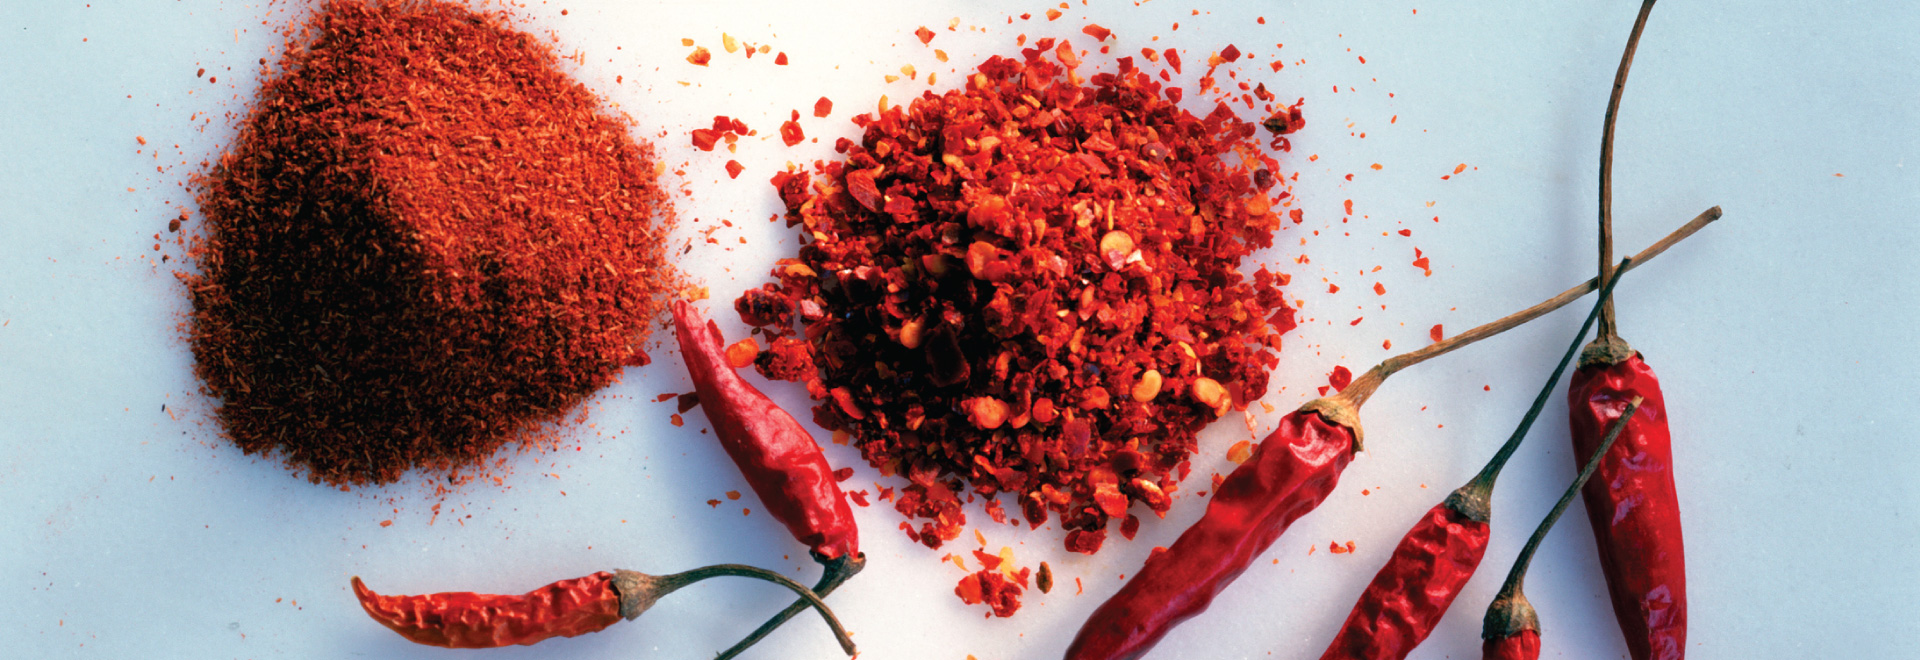 keep-warm-with-spicy-food-in-winter